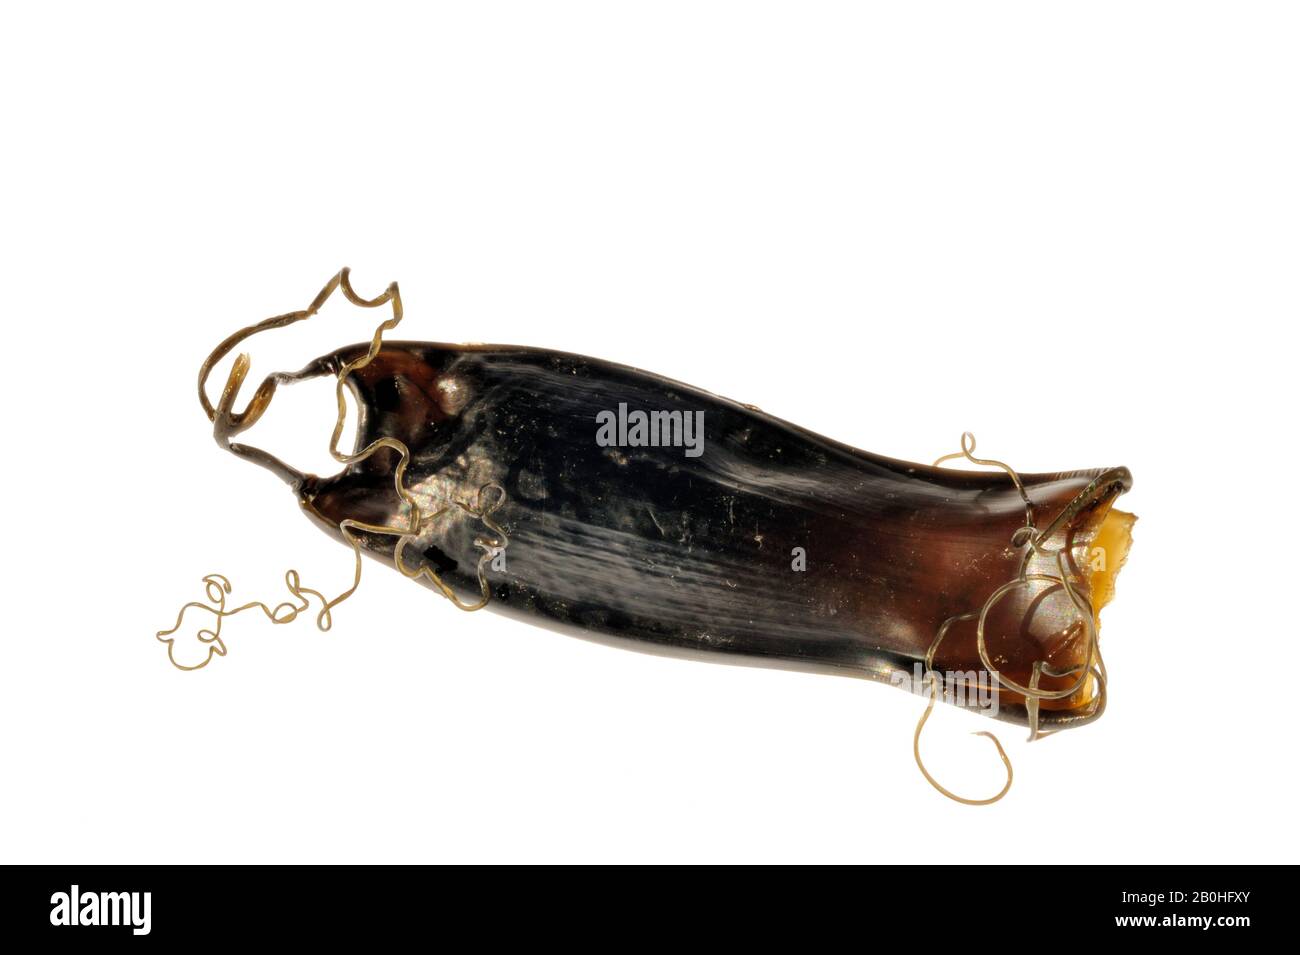 Egg case / mermaids purse of small-spotted catshark / lesser spotted  dogfish shark (Scyliorhinus canicula) against white background Stock Photo  - Alamy